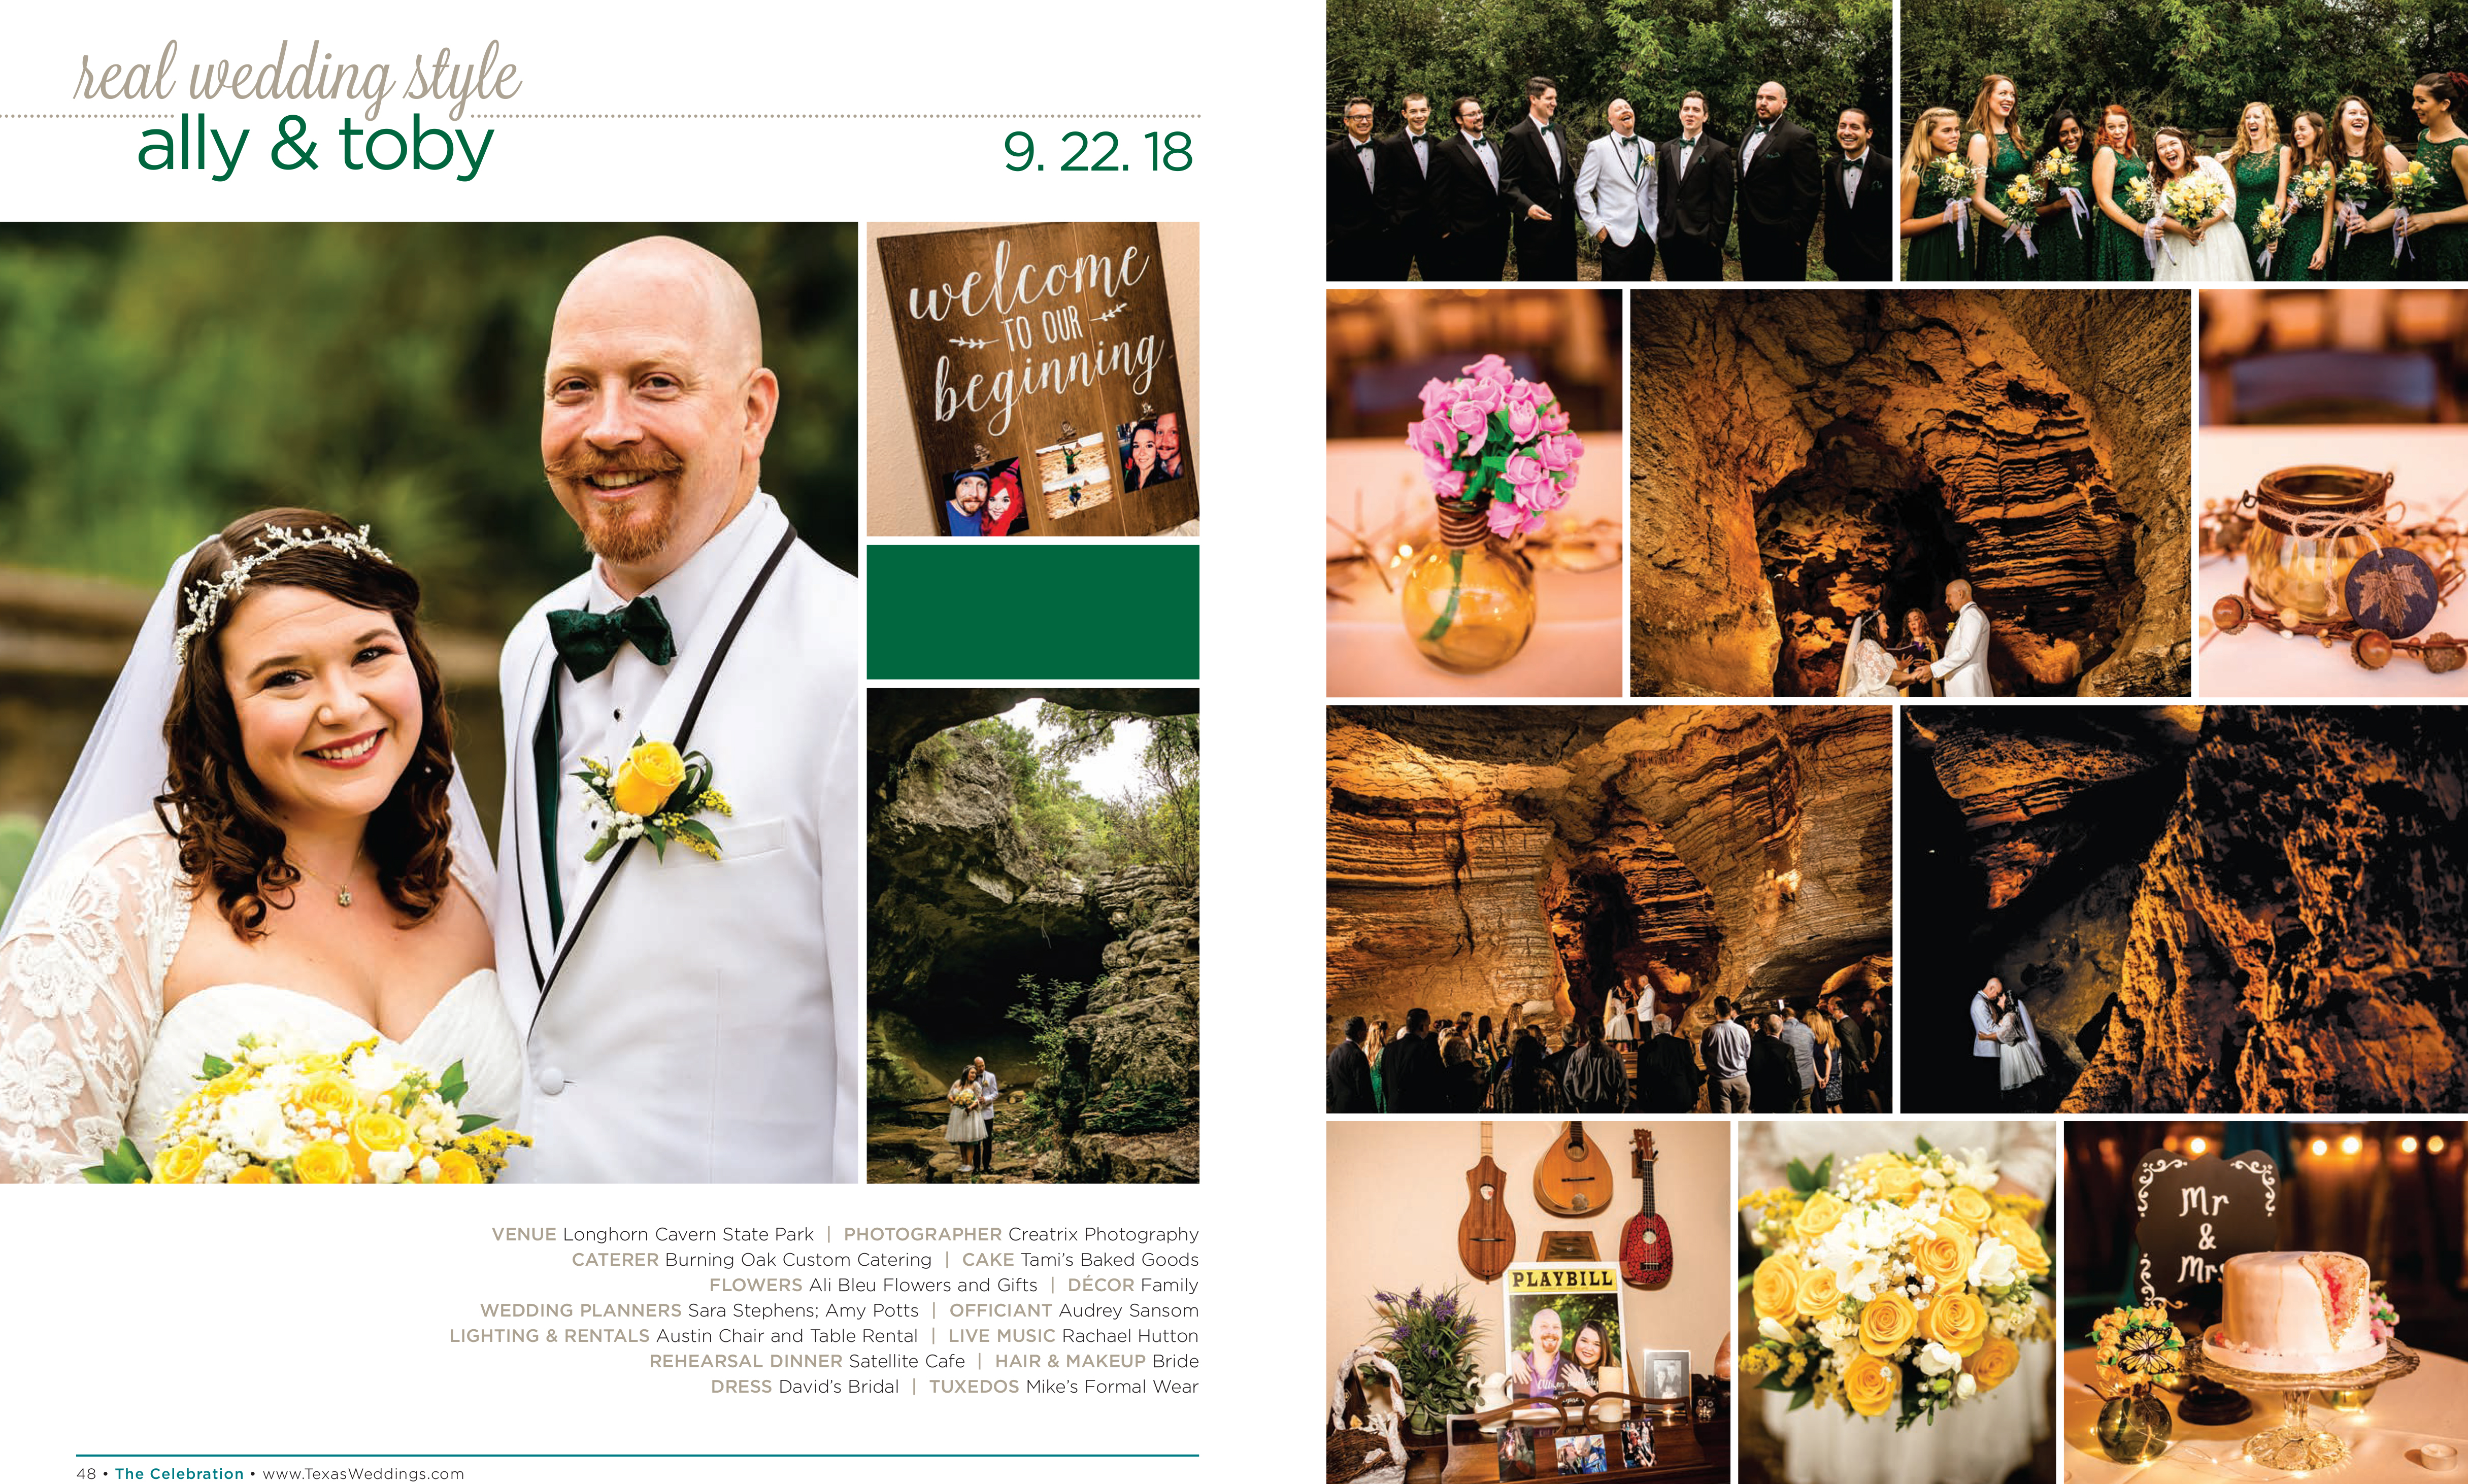 Ally & Toby in their Real Wedding Page in the Spring/Summer 2019 Texas Wedding Guide